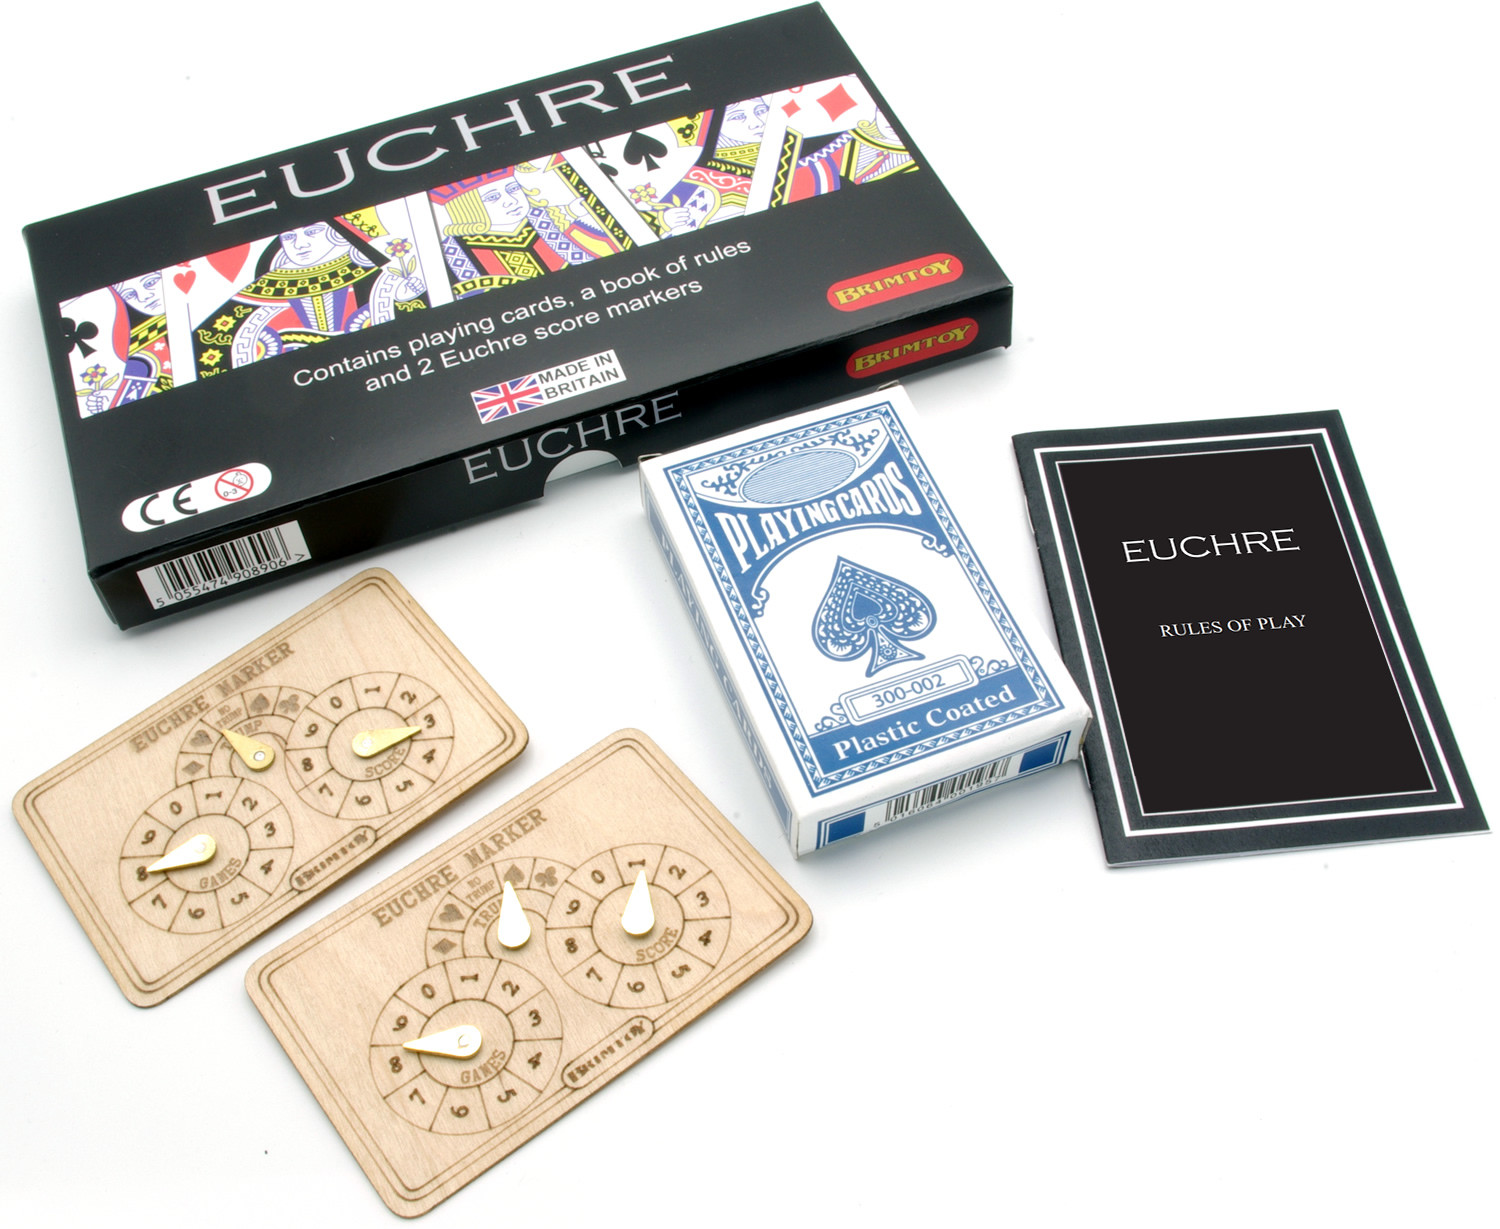 Euchre boxed playing card game set